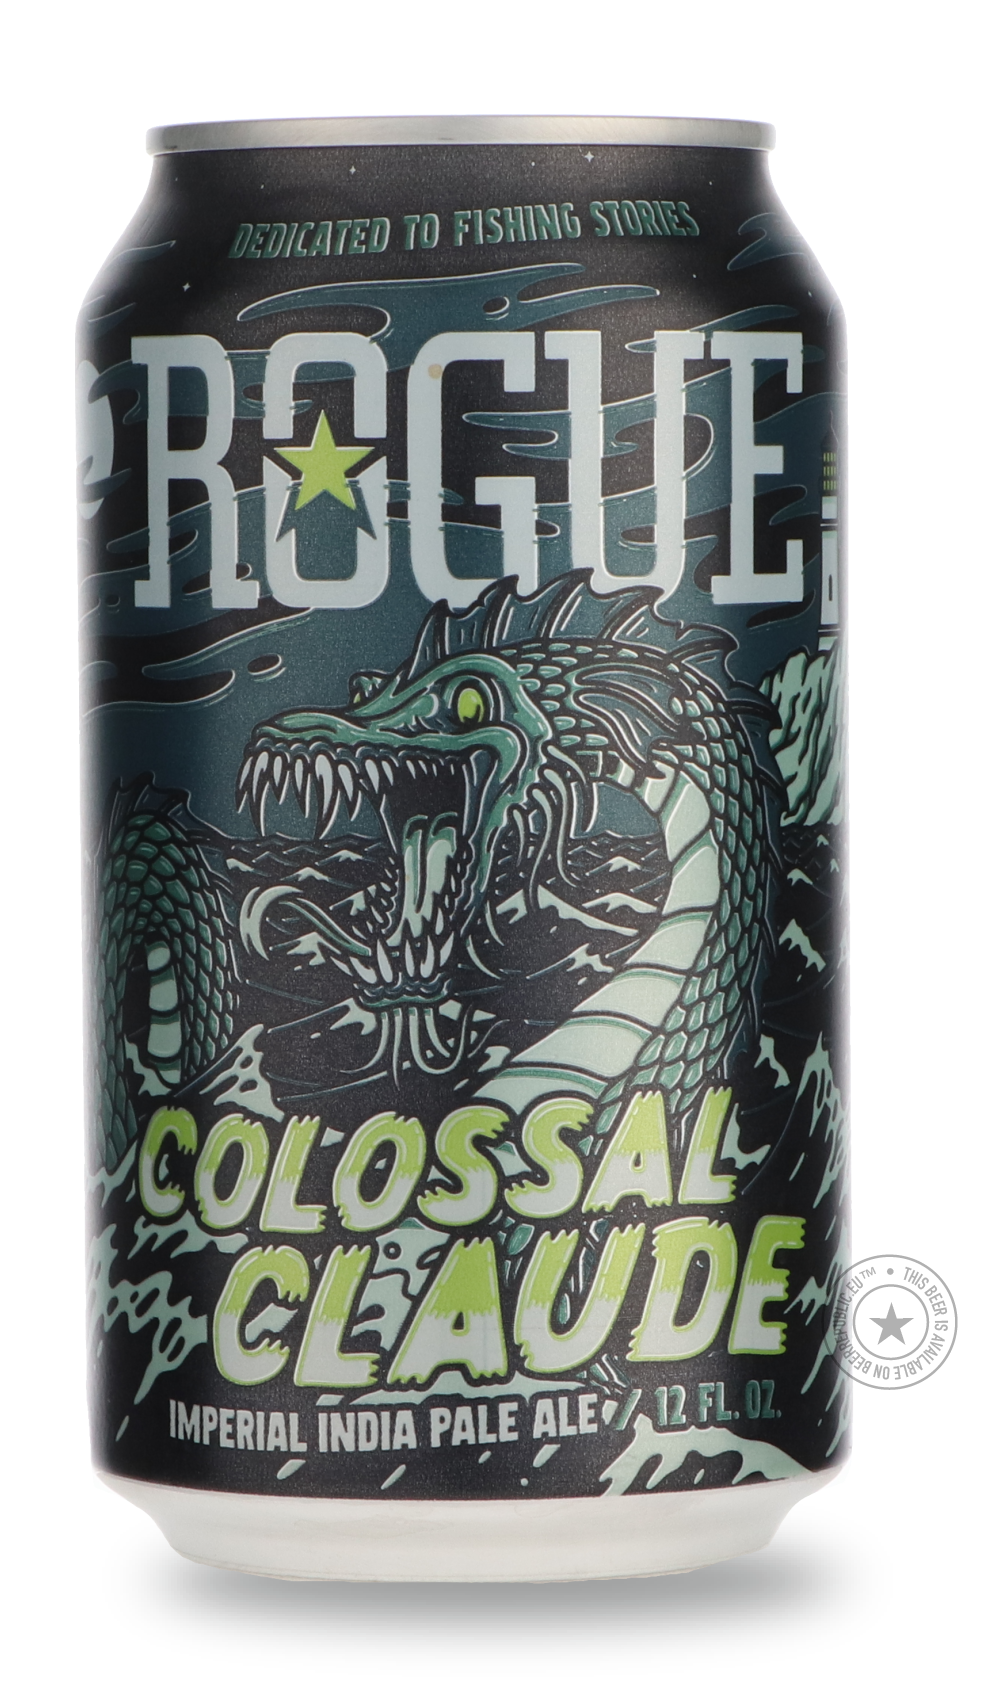 -Rogue- Colossal Claude-IPA- Only @ Beer Republic - The best online beer store for American & Canadian craft beer - Buy beer online from the USA and Canada - Bier online kopen - Amerikaans bier kopen - Craft beer store - Craft beer kopen - Amerikanisch bier kaufen - Bier online kaufen - Acheter biere online - IPA - Stout - Porter - New England IPA - Hazy IPA - Imperial Stout - Barrel Aged - Barrel Aged Imperial Stout - Brown - Dark beer - Blond - Blonde - Pilsner - Lager - Wheat - Weizen - Amber - Barley Wi